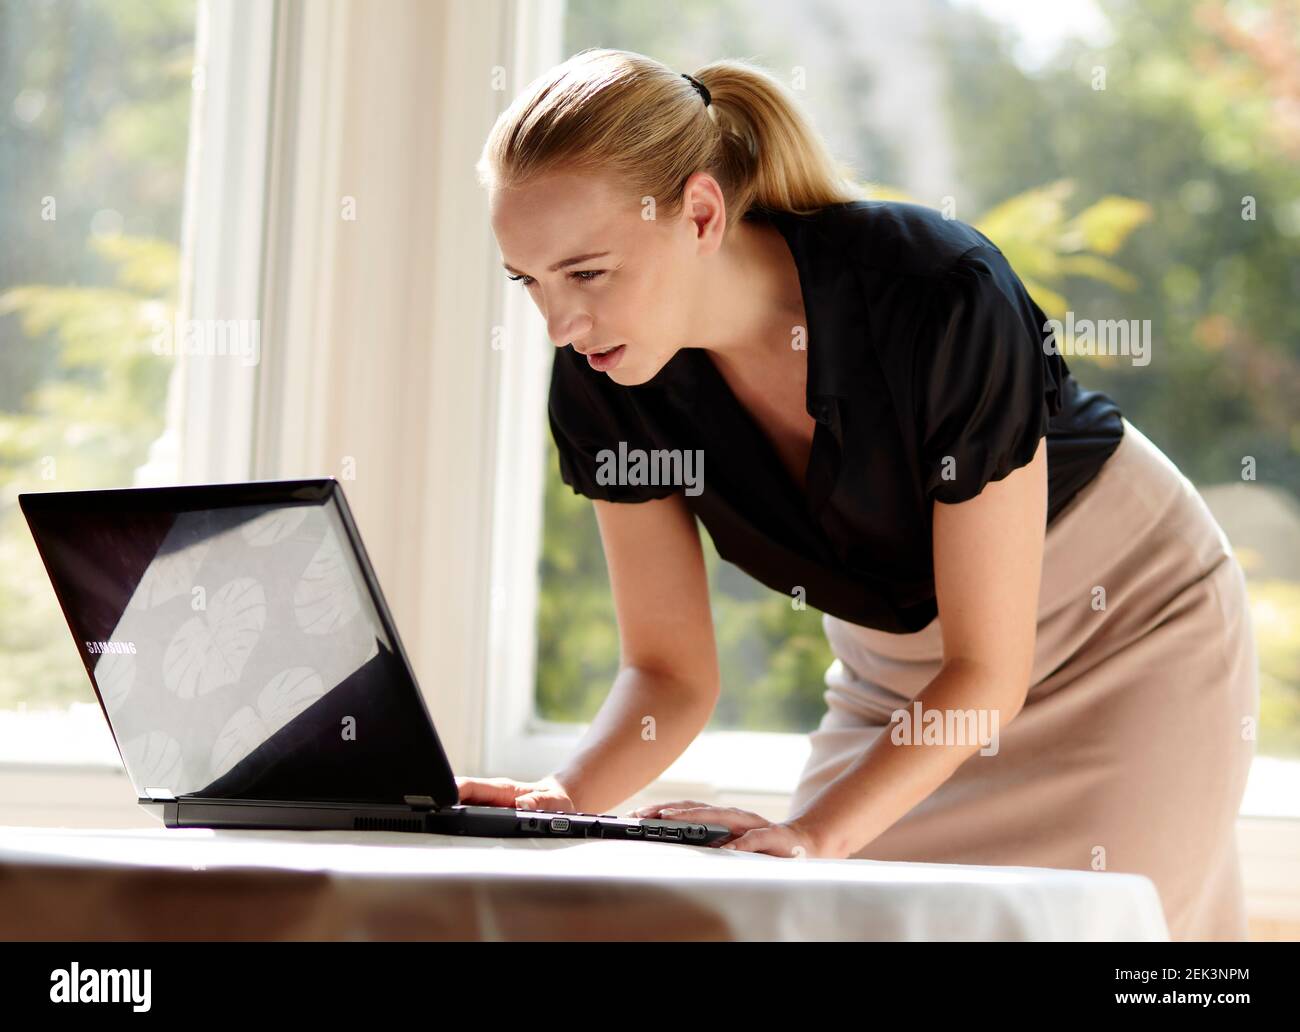 Stressed out businesswoman Stock Photo